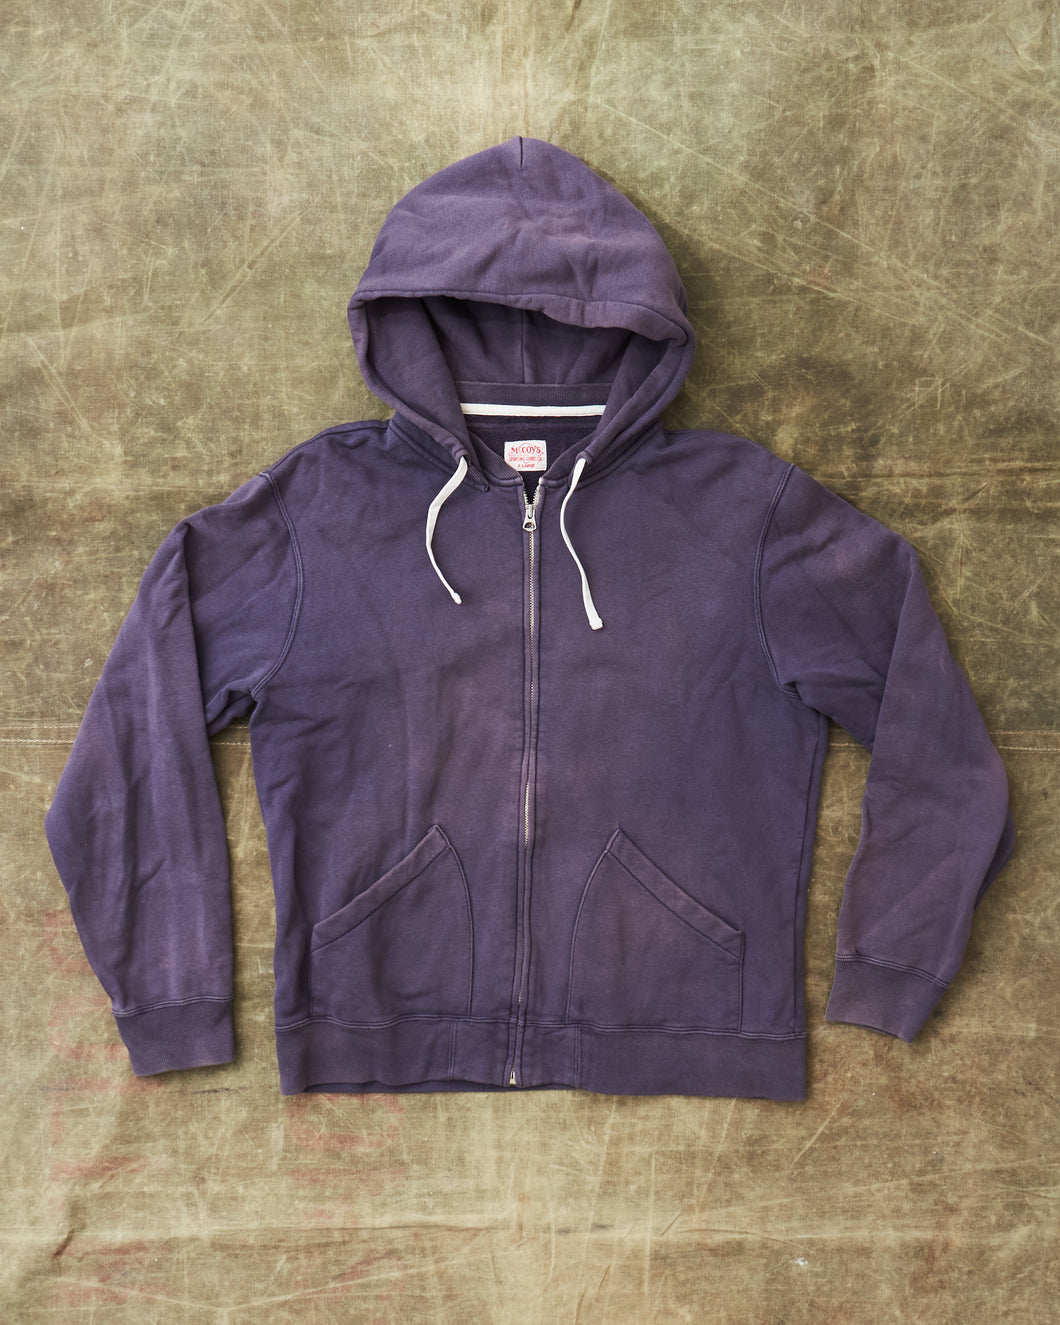 Second Hand Real McCoy's Mfg. Co. Zip Hoodie Gray/Purple Size XL